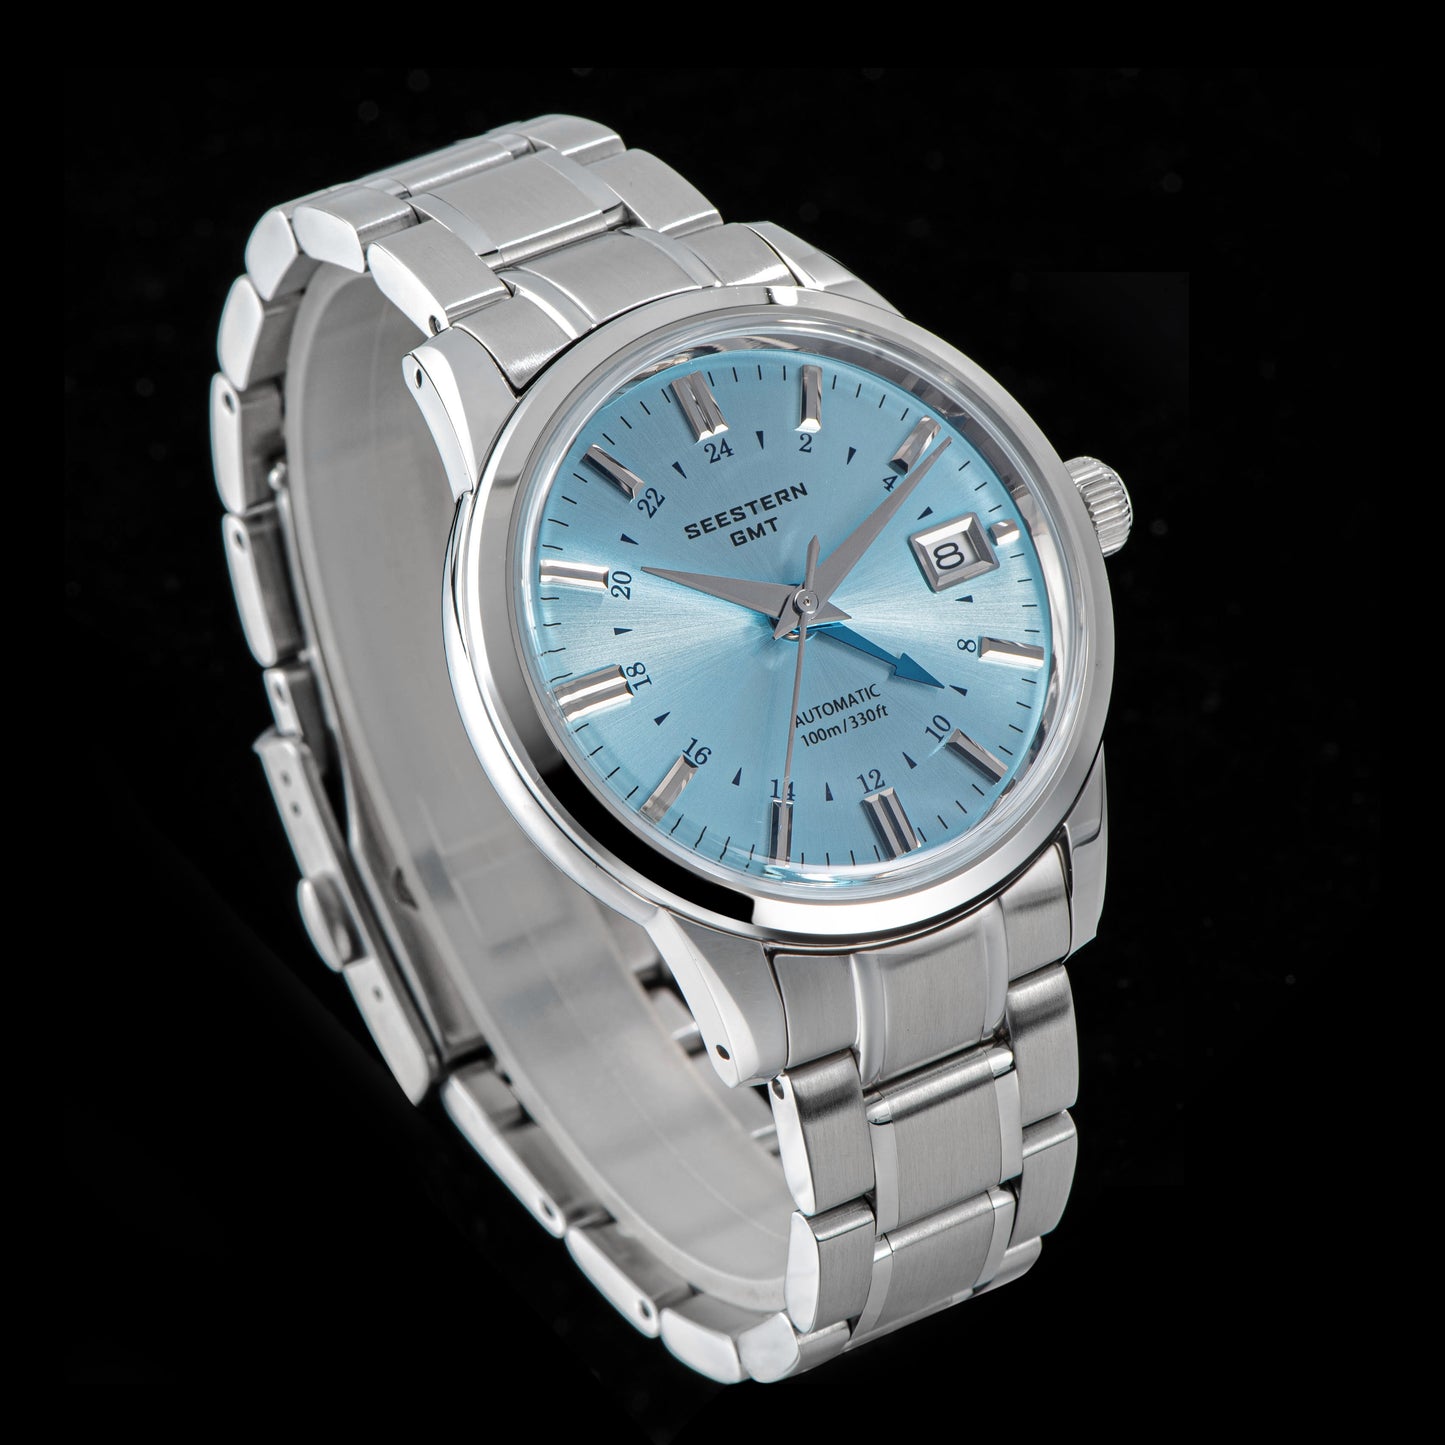 Seestern S446 GMT Watch Ice Blue Dial (Seiko NH34 GMT movement)